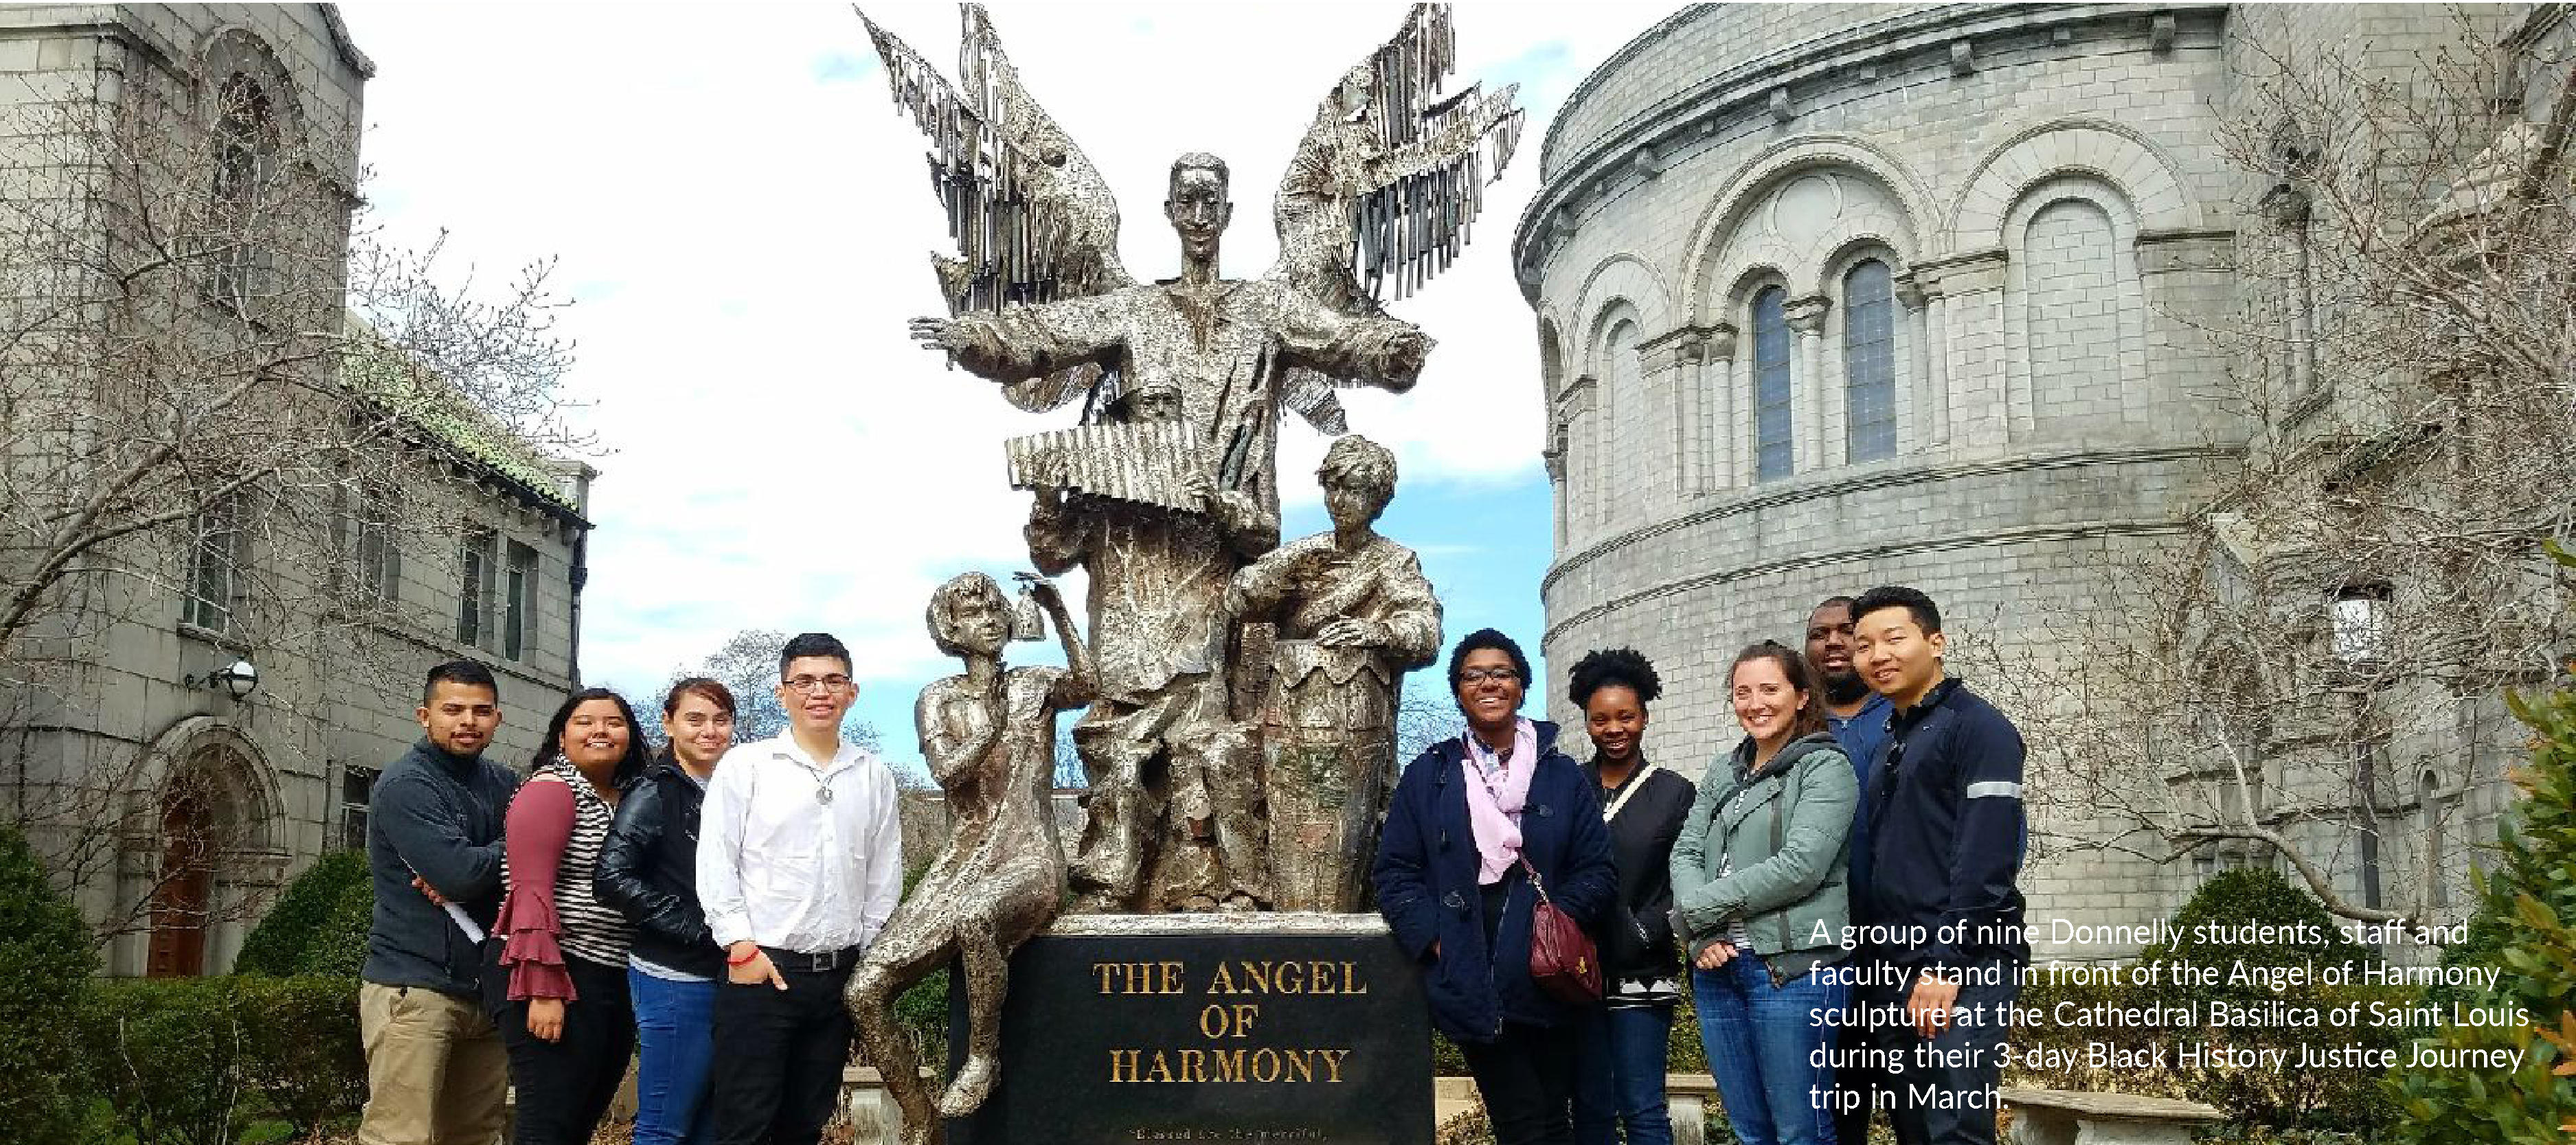 Donnelly students on Black History Justice Journey trip